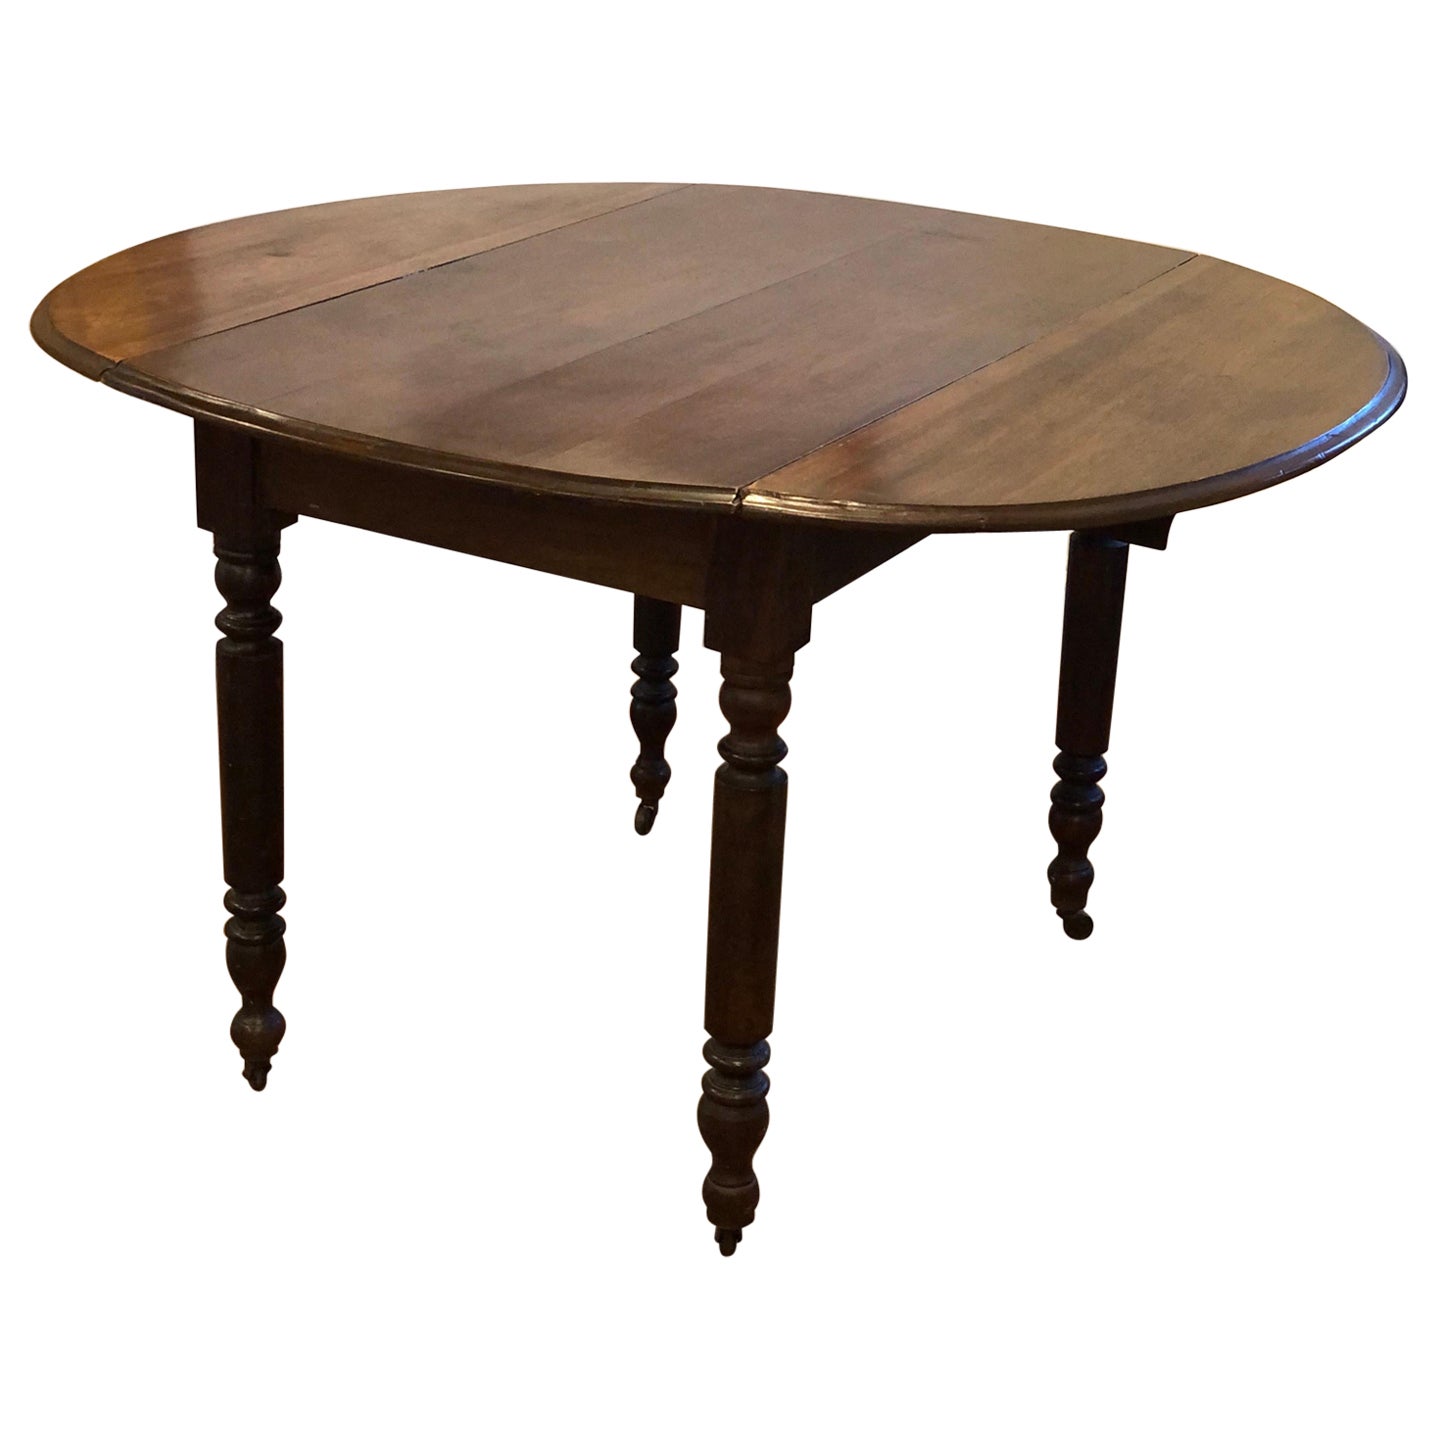 19th C. English Walnut Drop Leaf Table with Oval Top For Sale